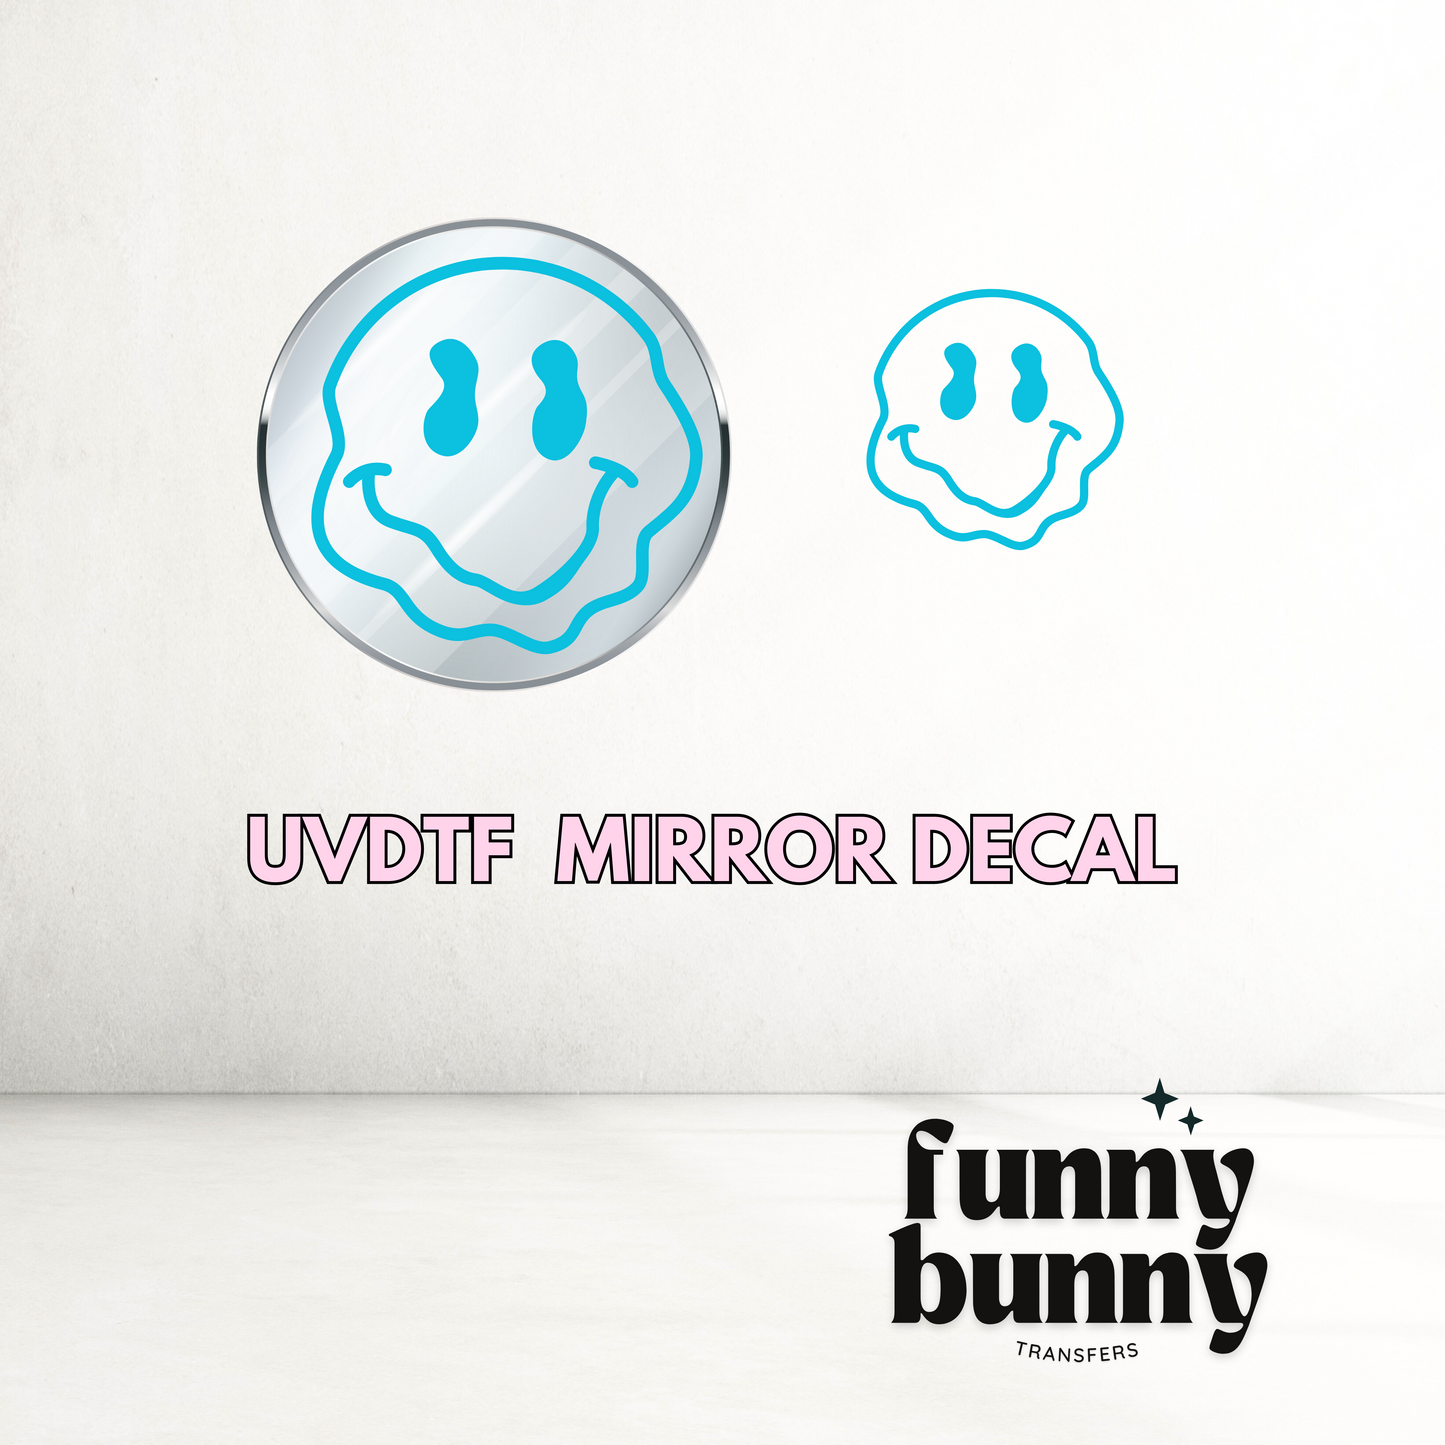 Retro Teal Smiley - UVDTF Mirror Decal